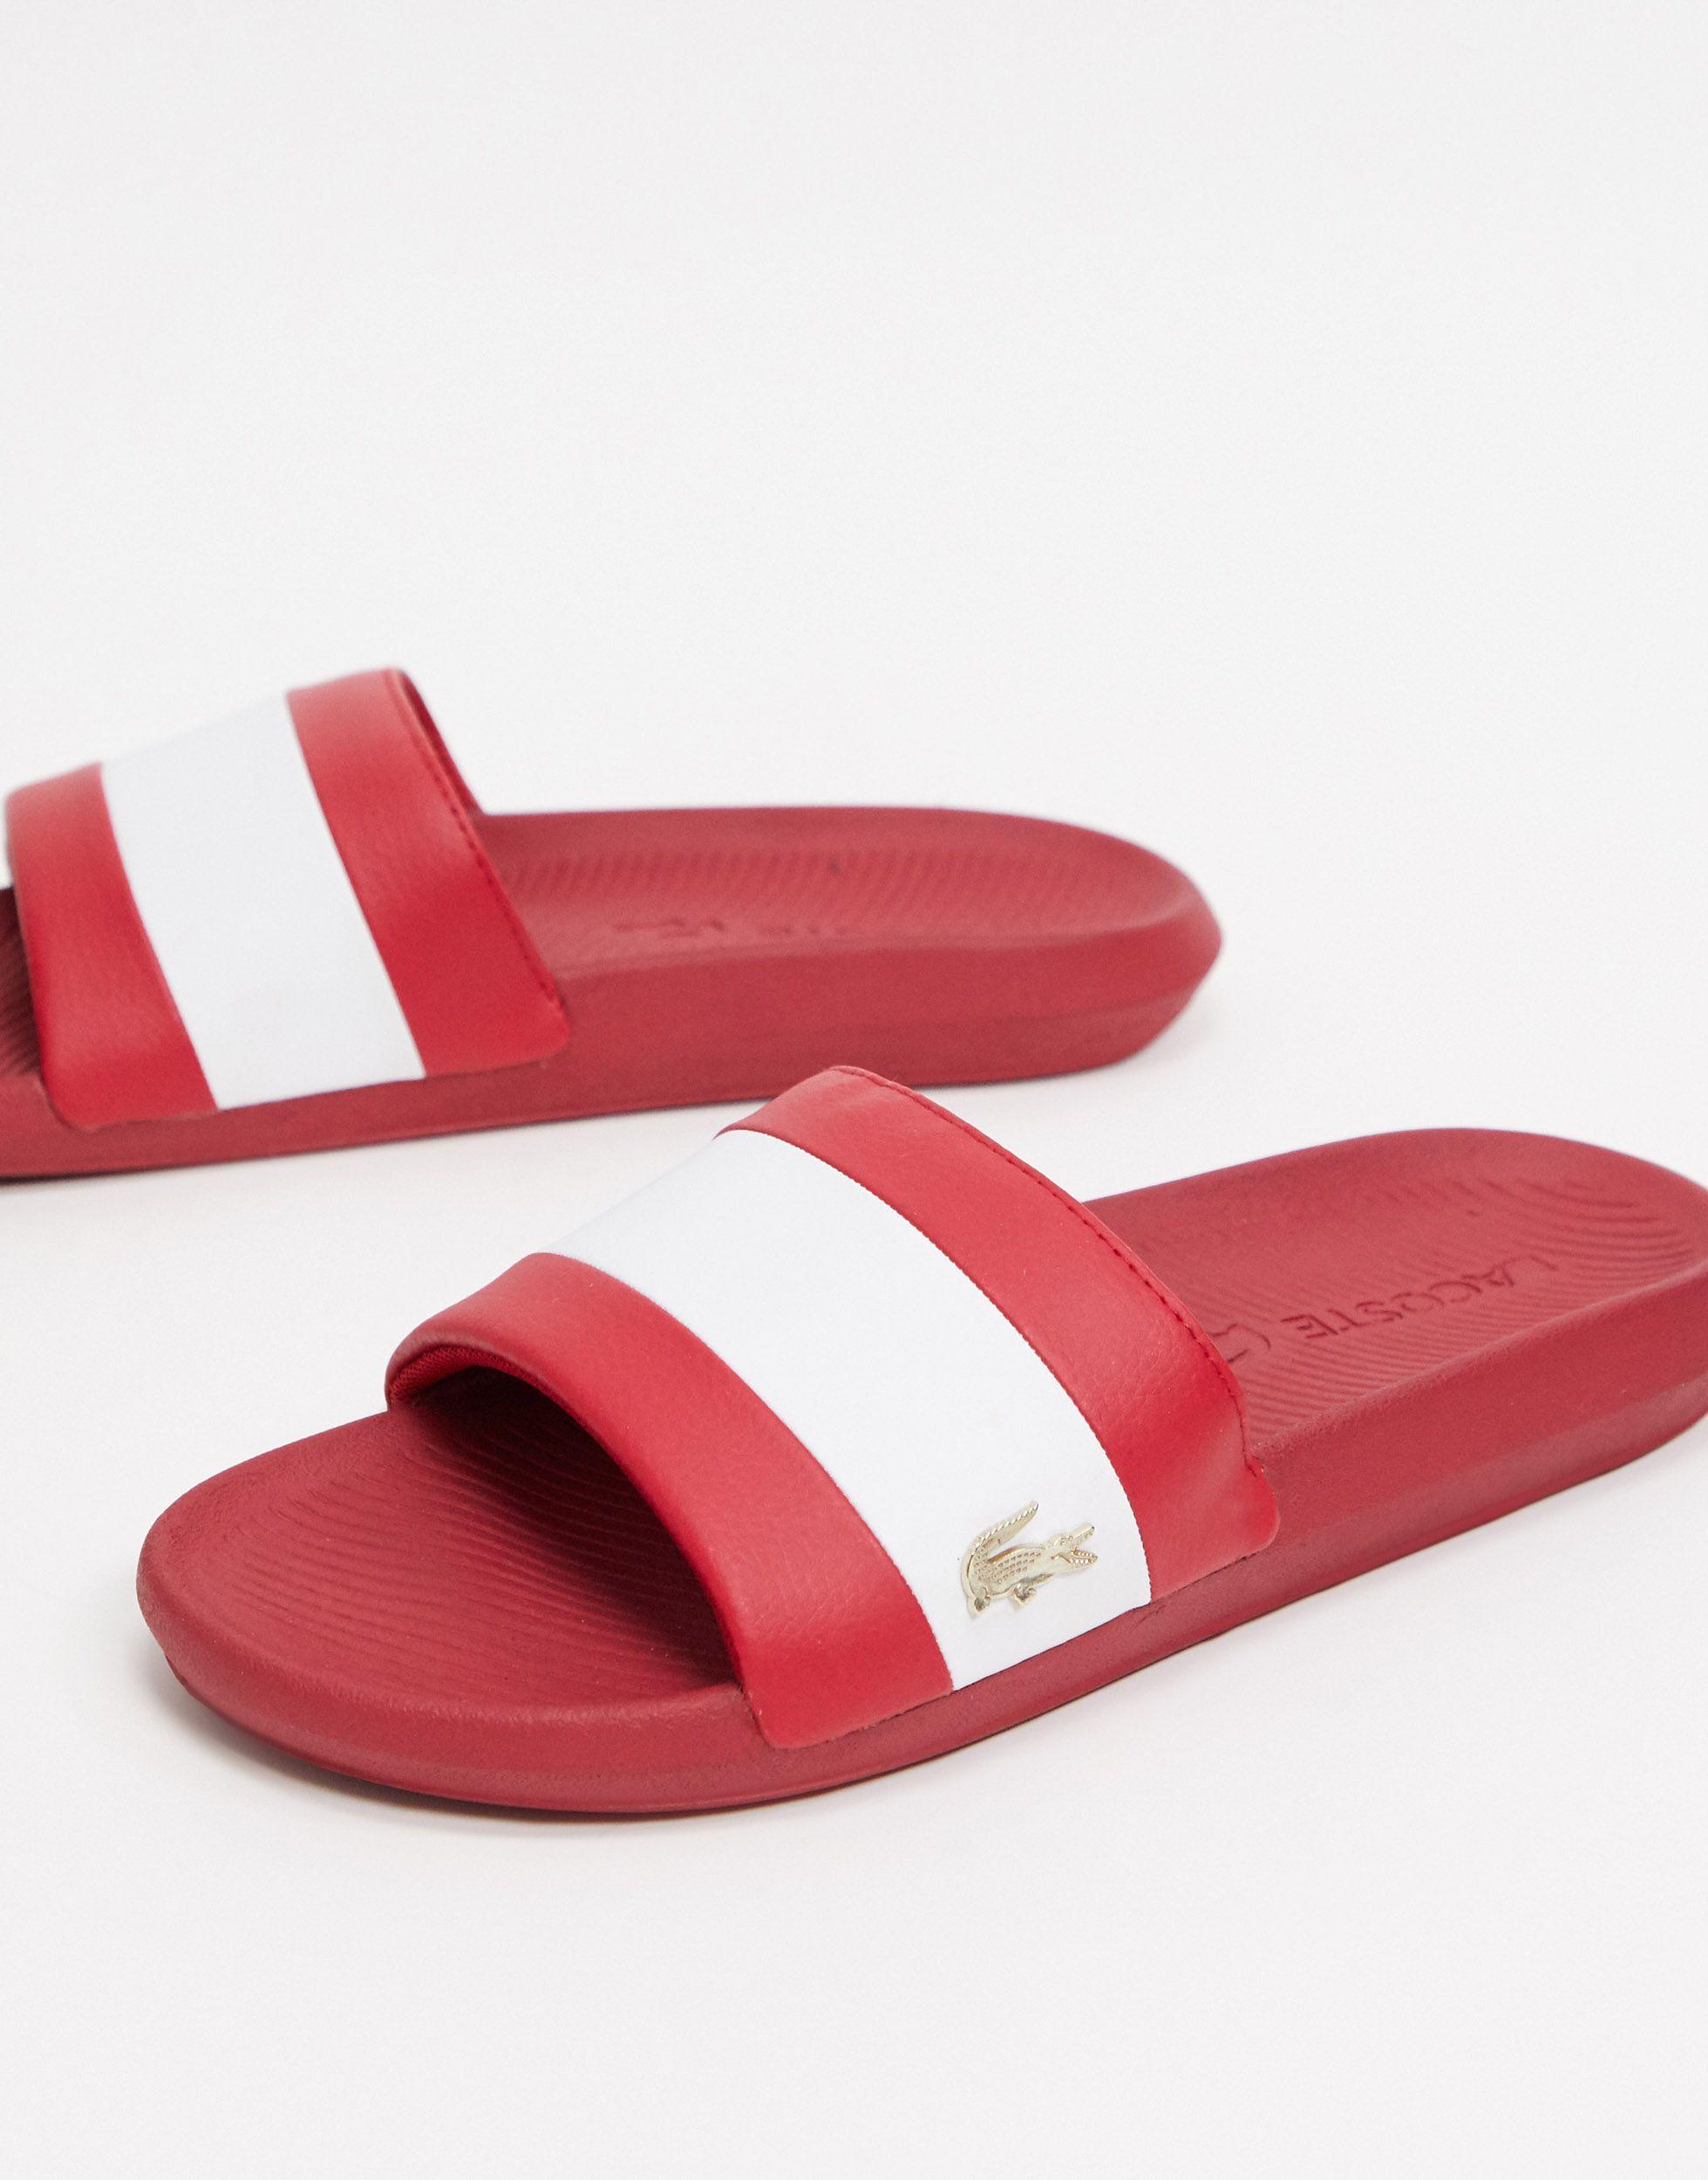 Lacoste Croco Sliders Red With Gold 